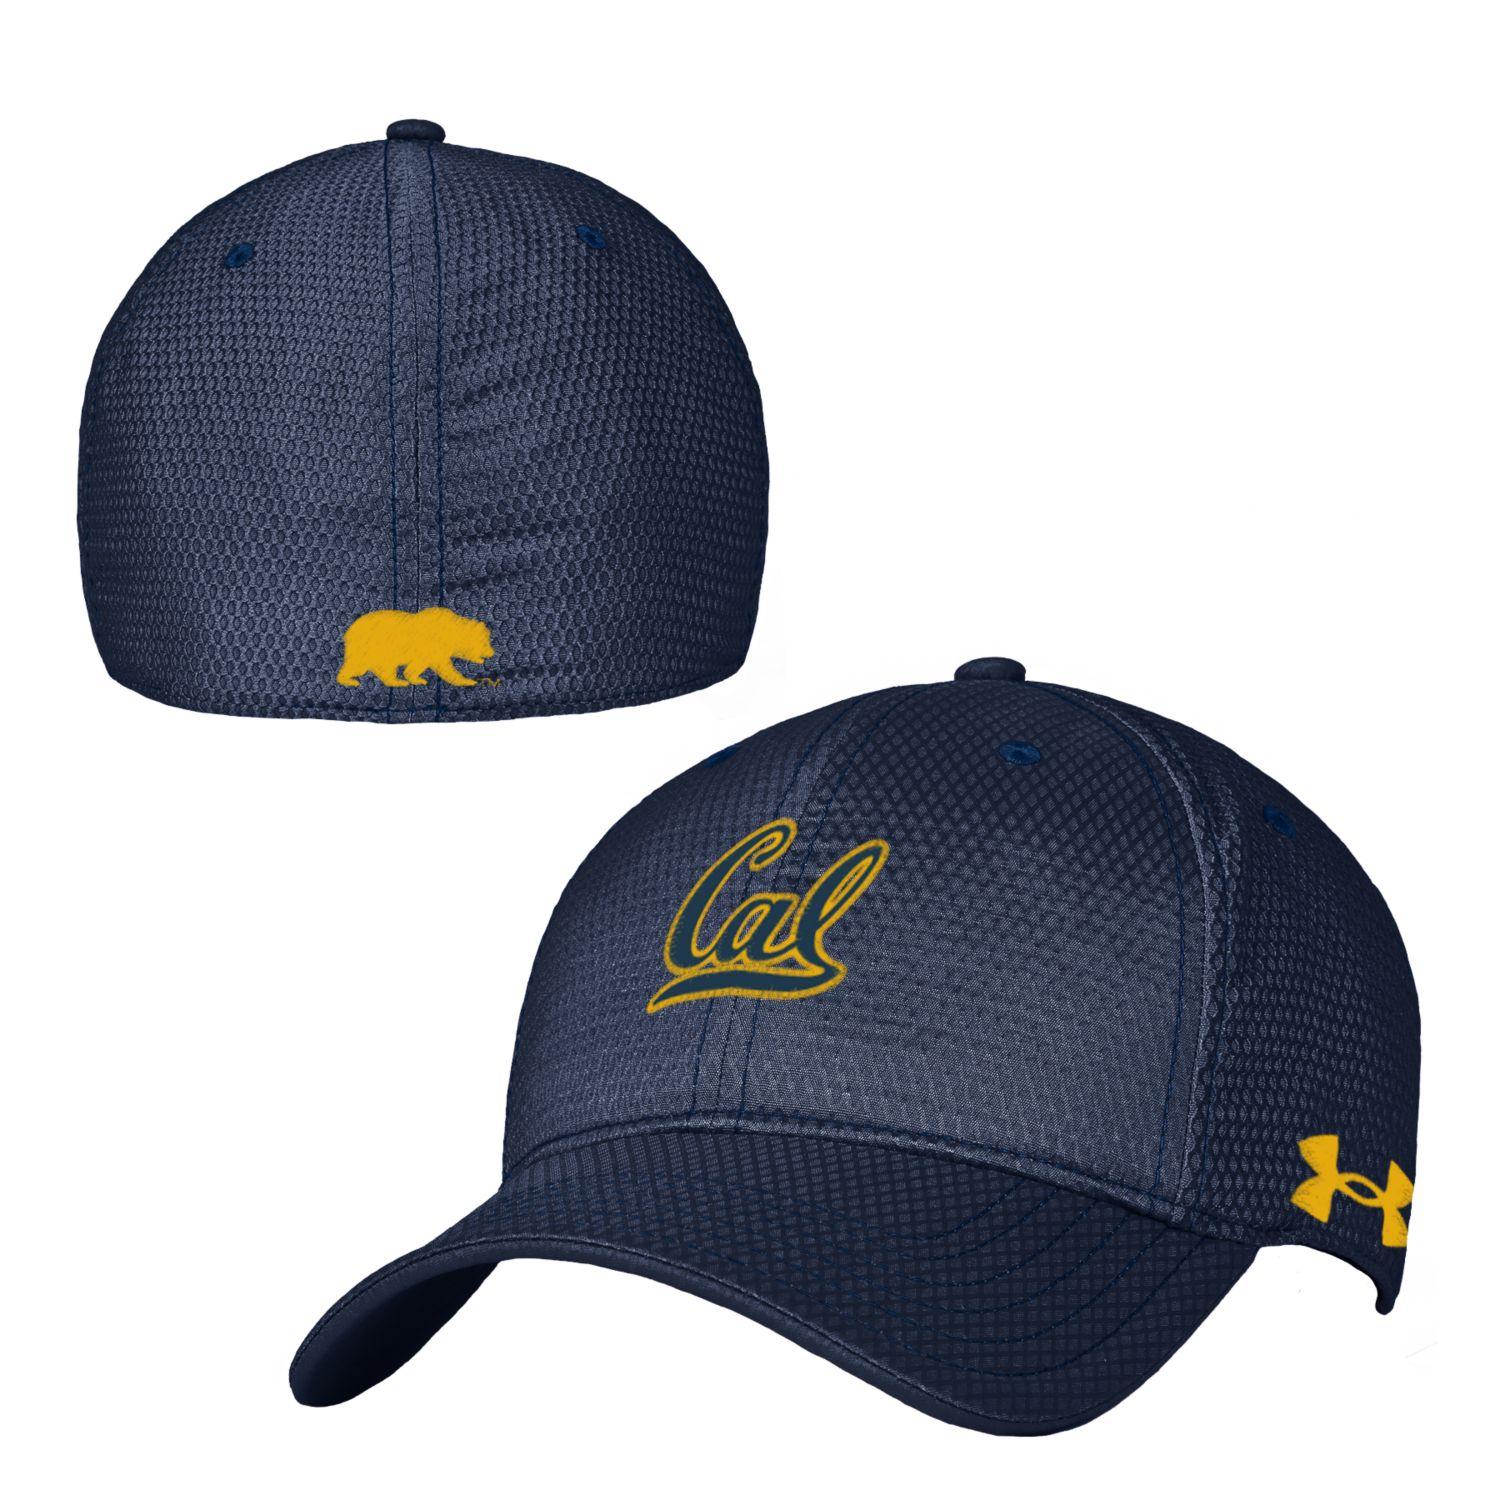 U.C. Berkeley Cal Embroidered Men's Stretch Fit Performance Dry Under Armour Hat in Navy Blue | Size Medium-Large